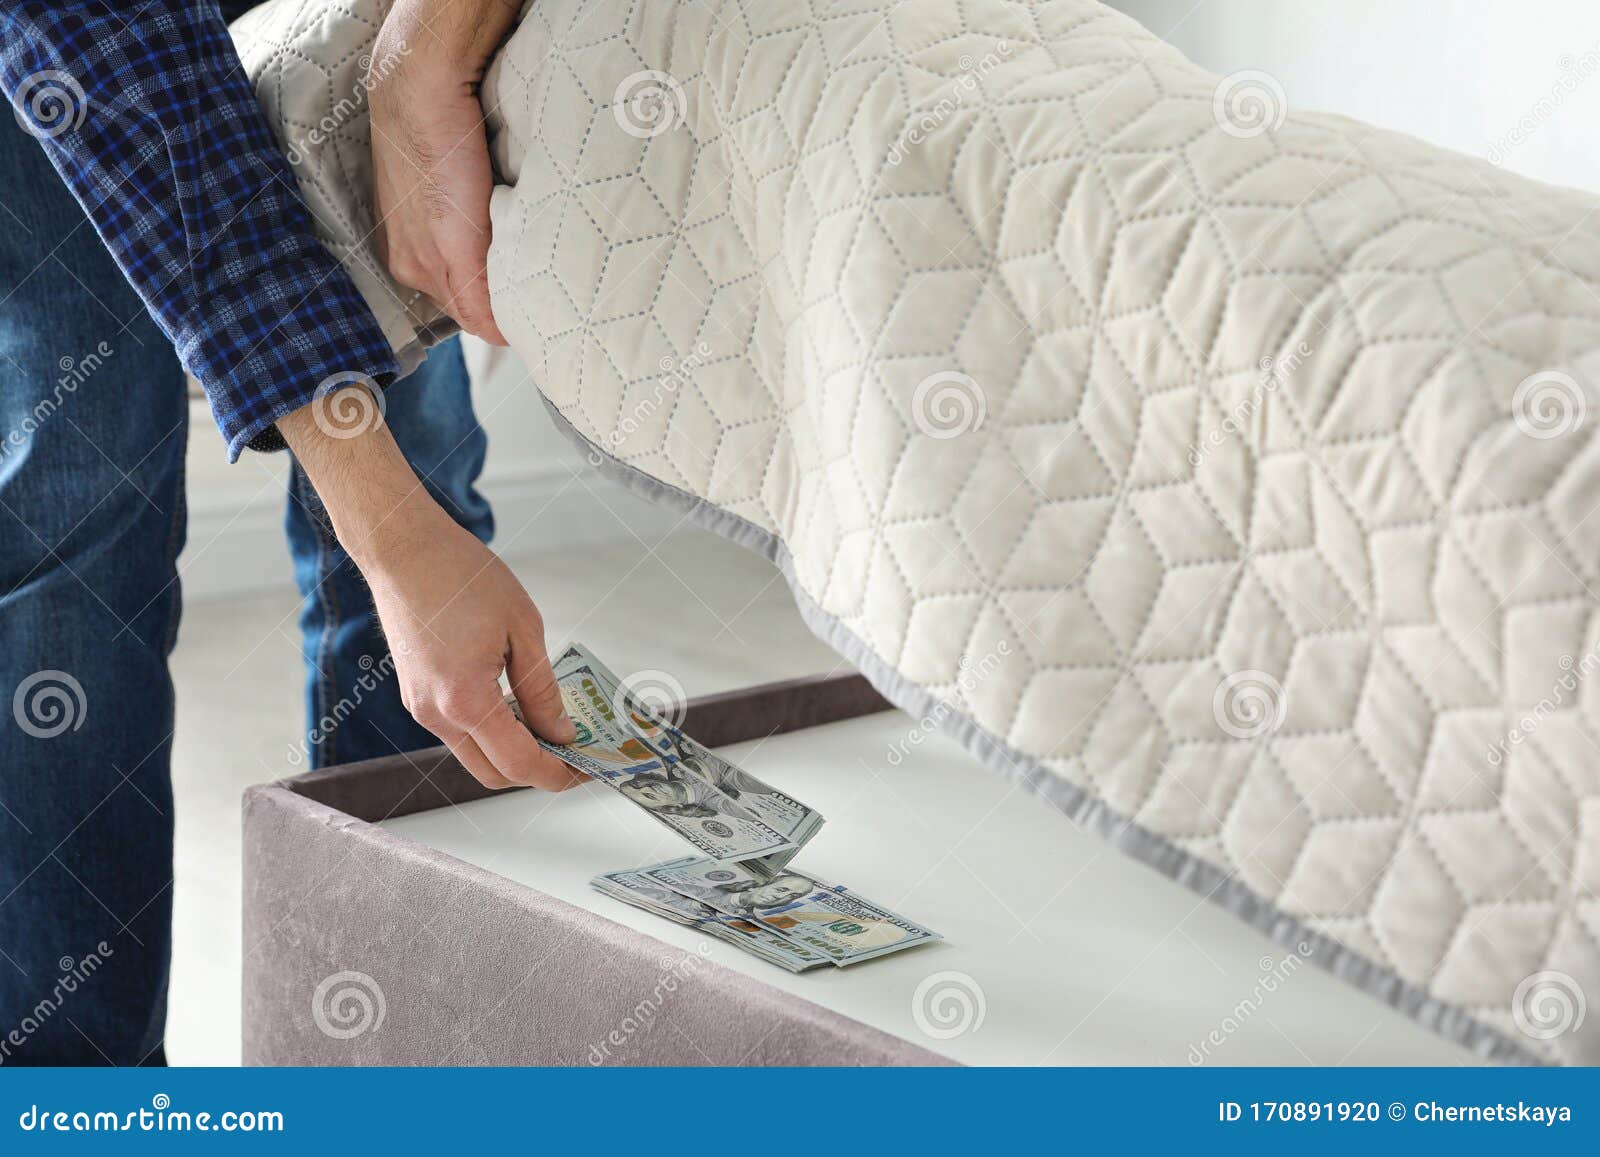 196 Mattress Money Photos Free Royalty Free Stock Photos From Dreamstime